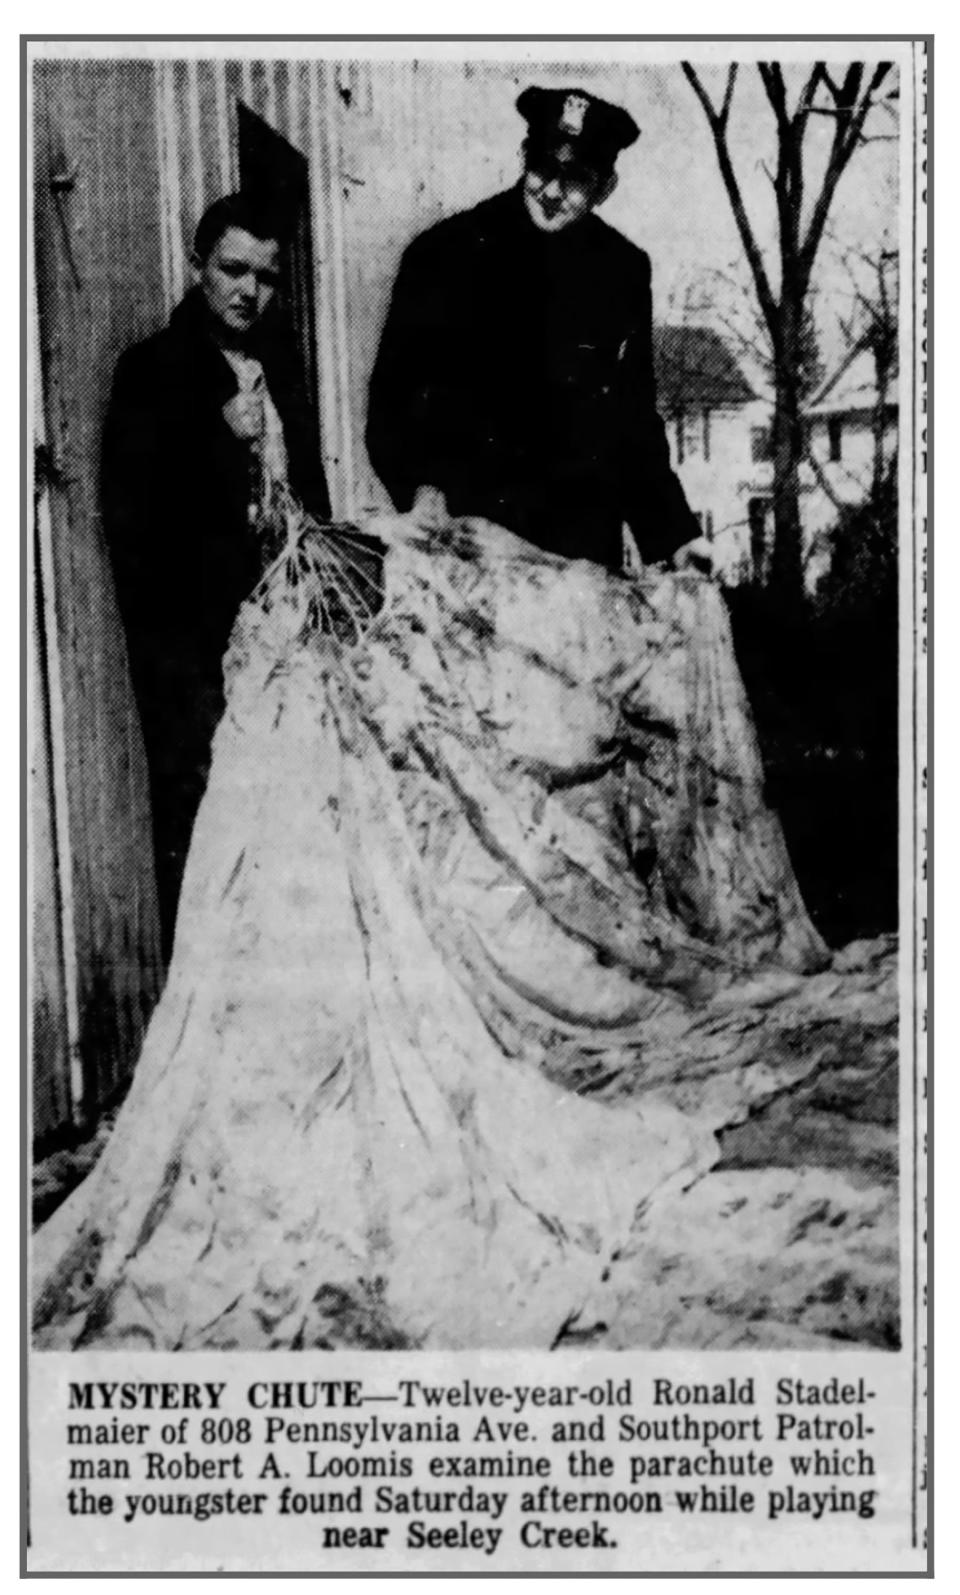 Image from the Star-Gazette dated March 4, 1957.